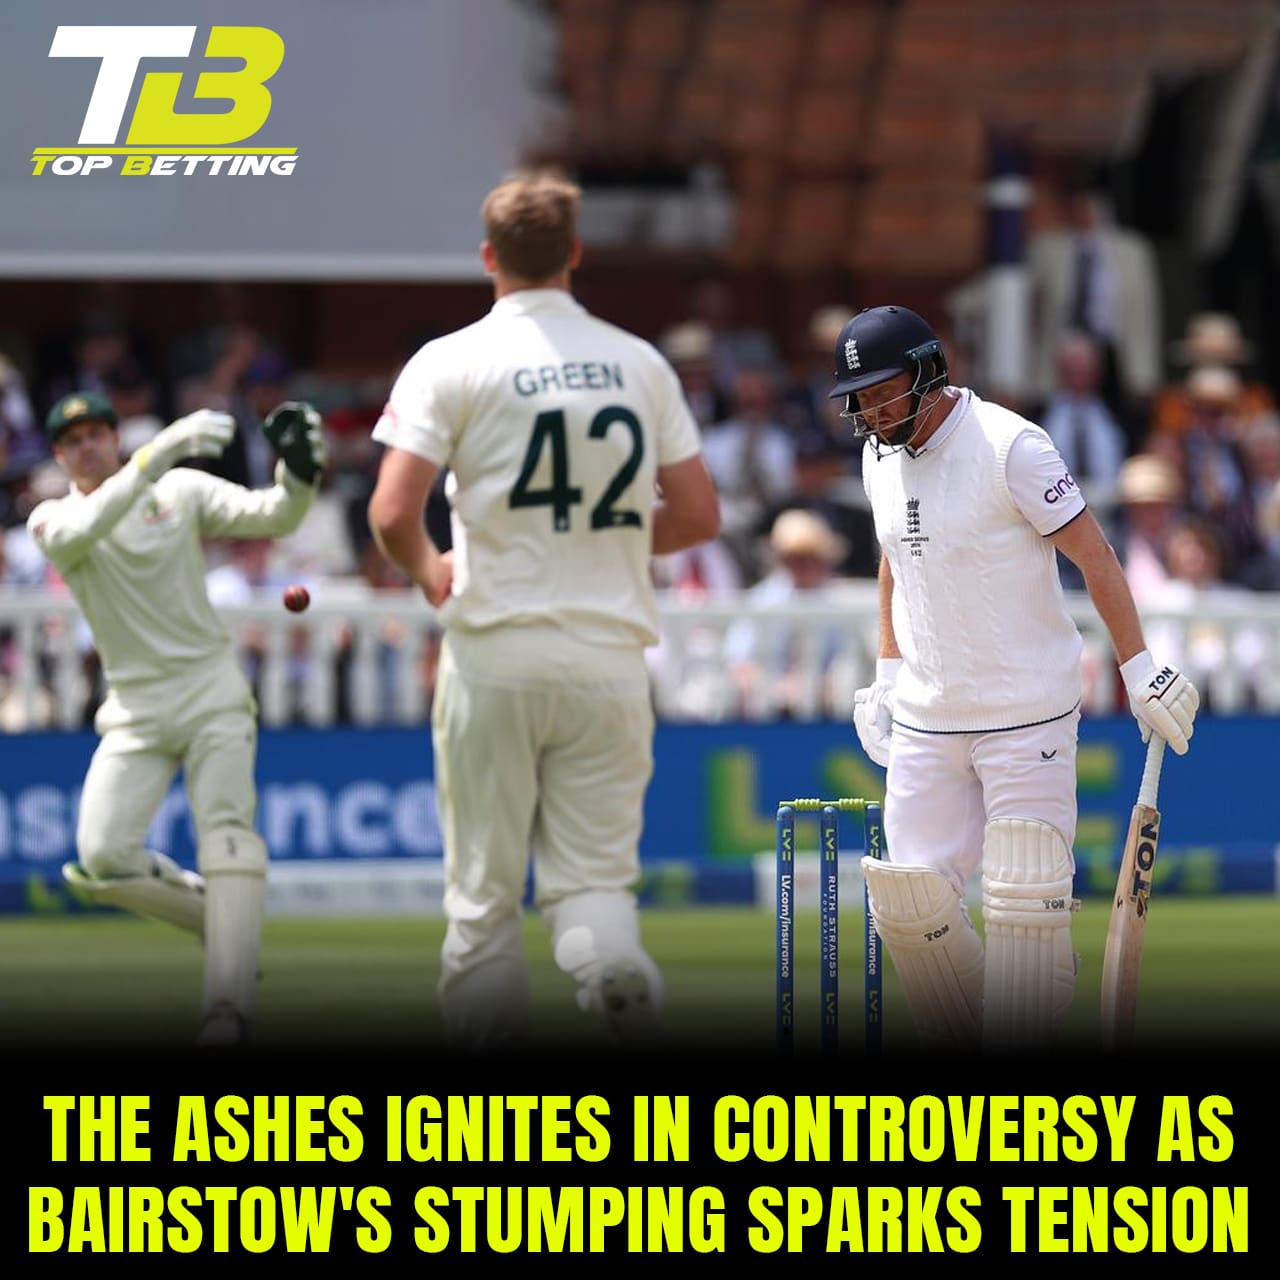 The Ashes Ignites Controversy as Bairstow’s Stumping Sparks Tension